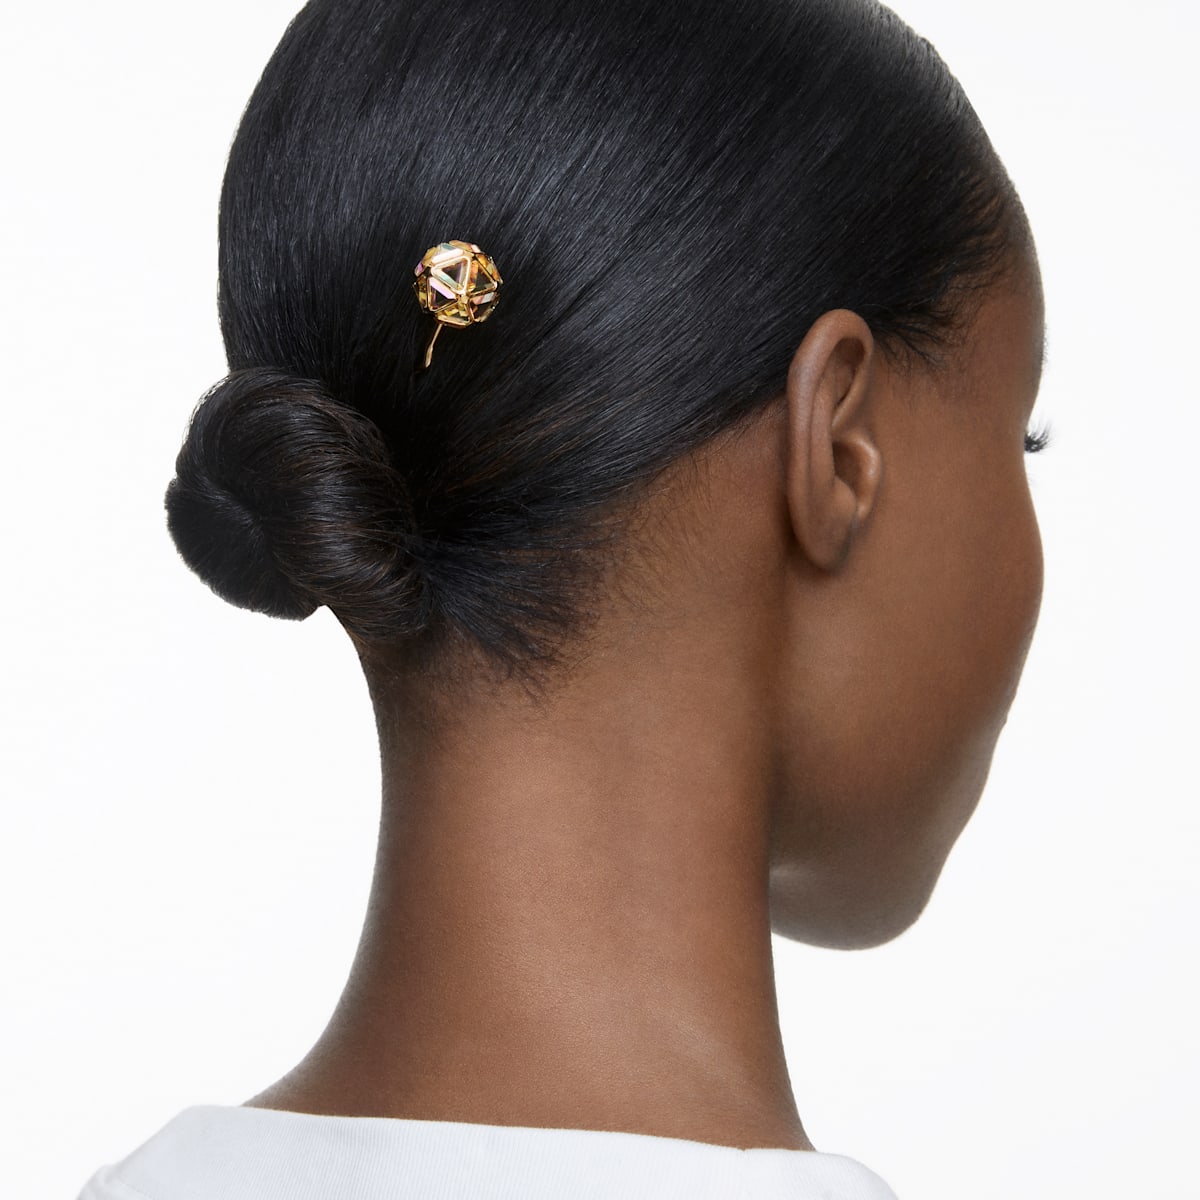 Crystal Hair Accessories For Sparkling Moments | Swarovski